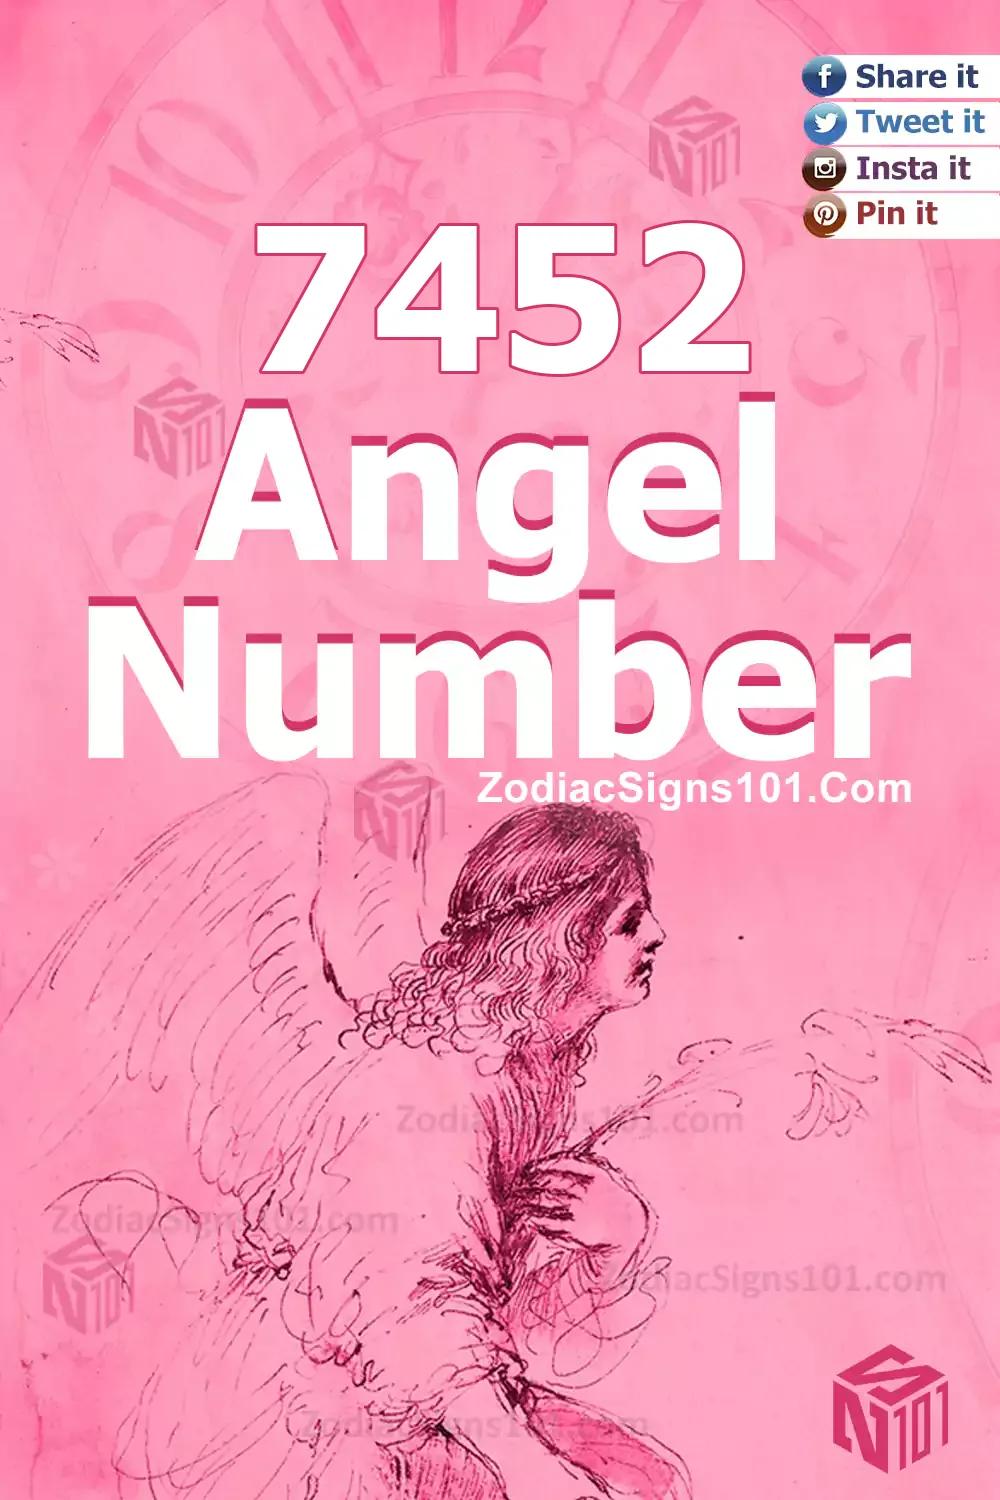 7452 Angel Number Meaning